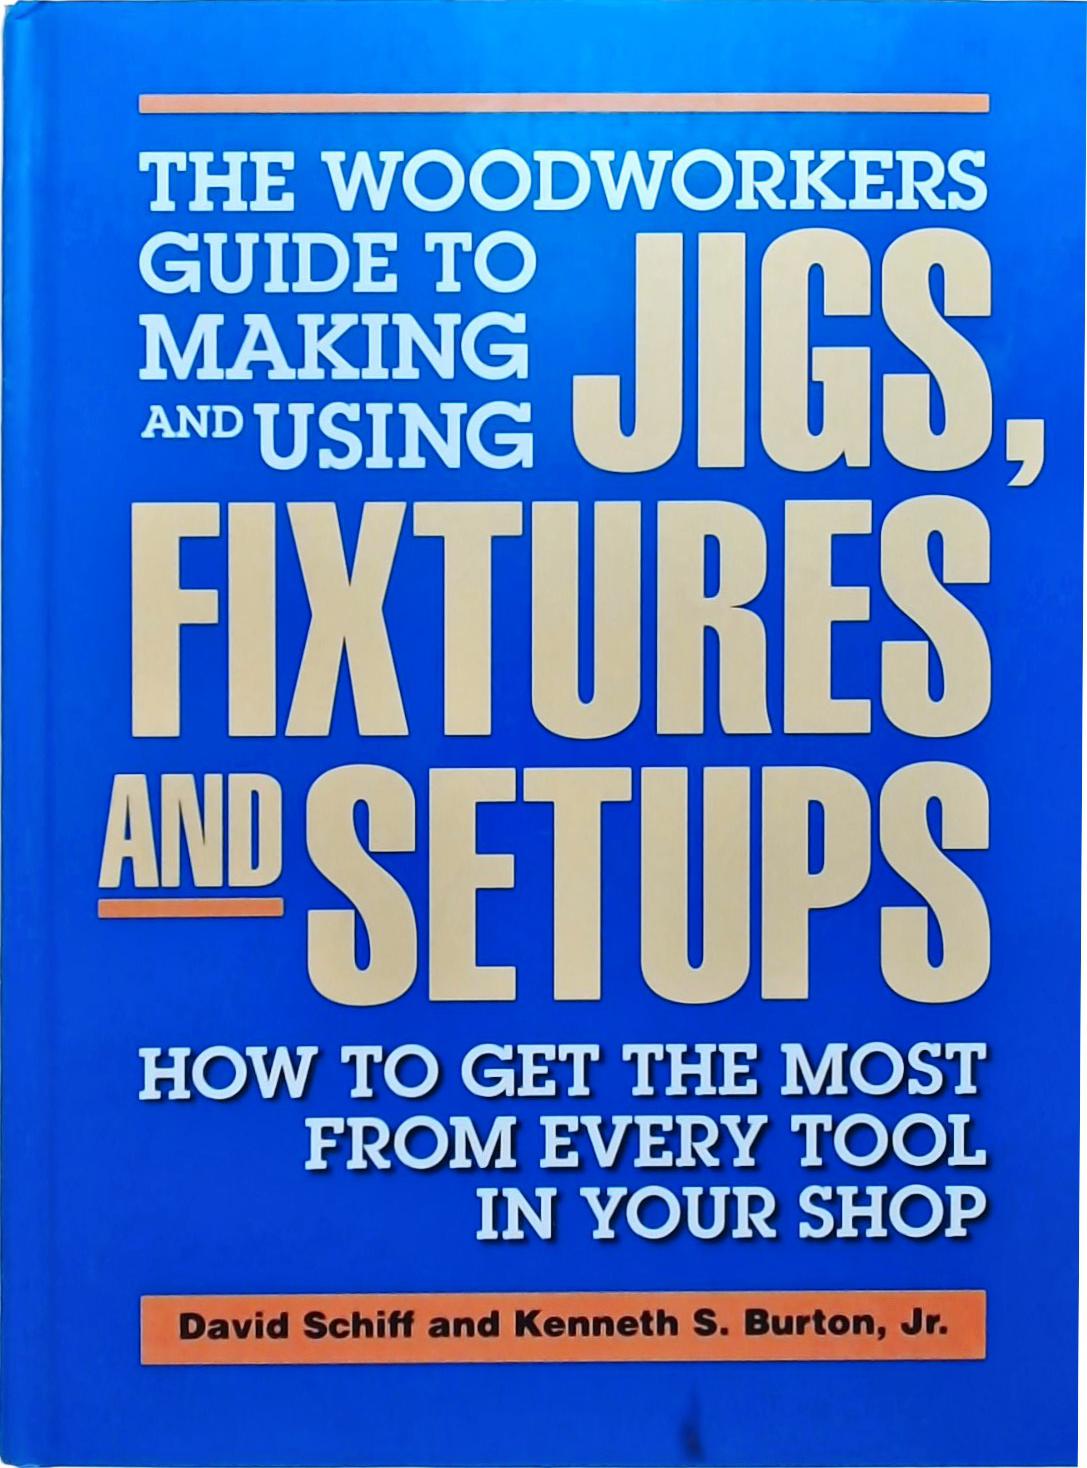 Woodworker's Guide To Making And Using Jigs, Fixtures, And Setups